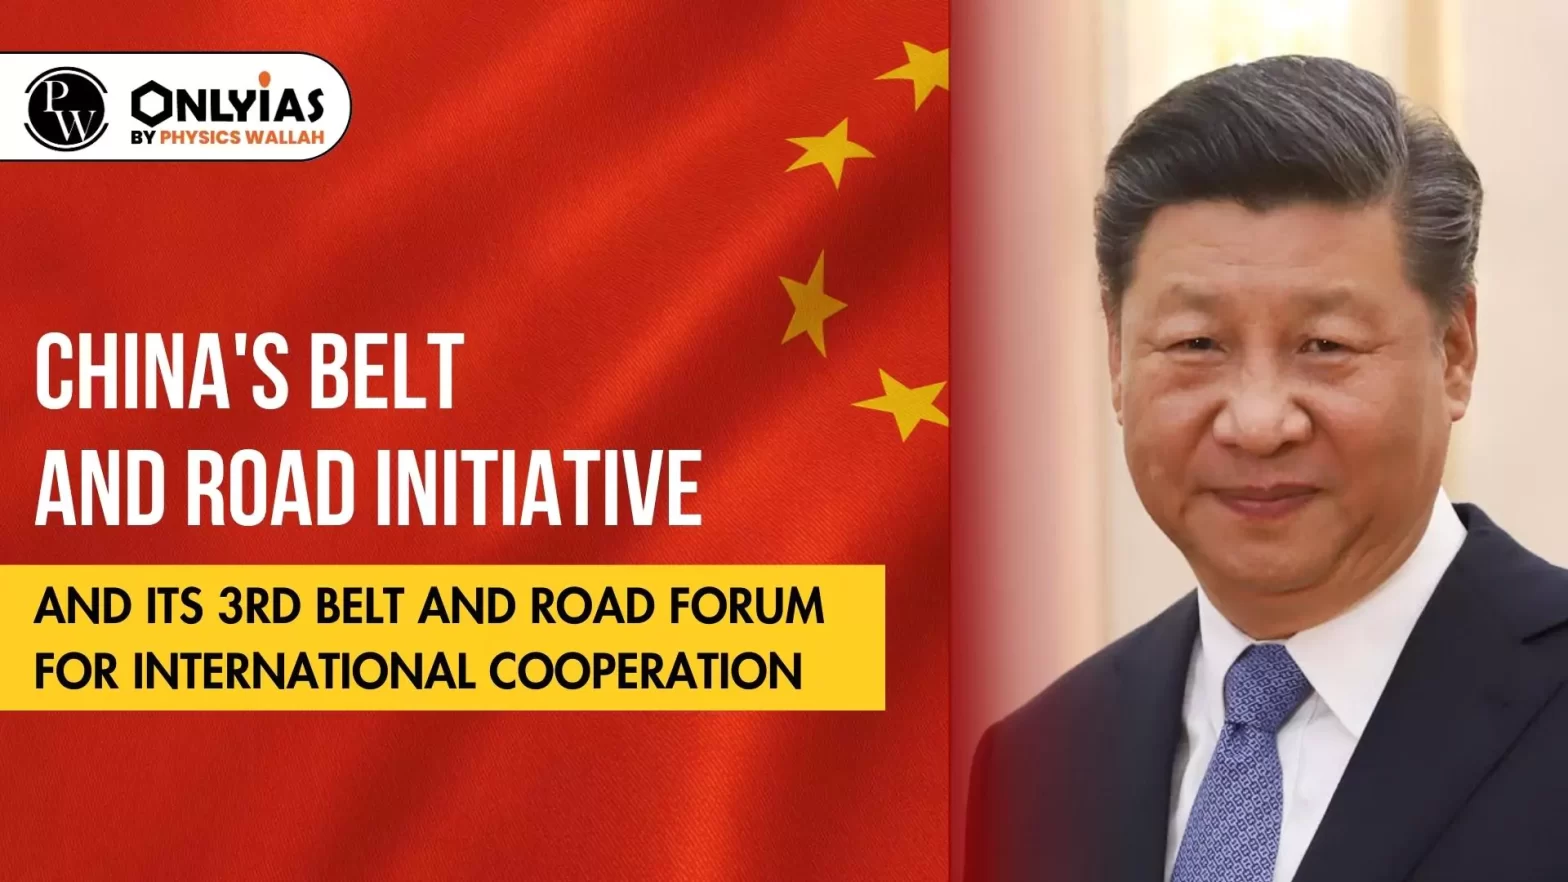 China’s Belt and Road Initiative and It’s 3rd Belt and Road Forum for International Cooperation